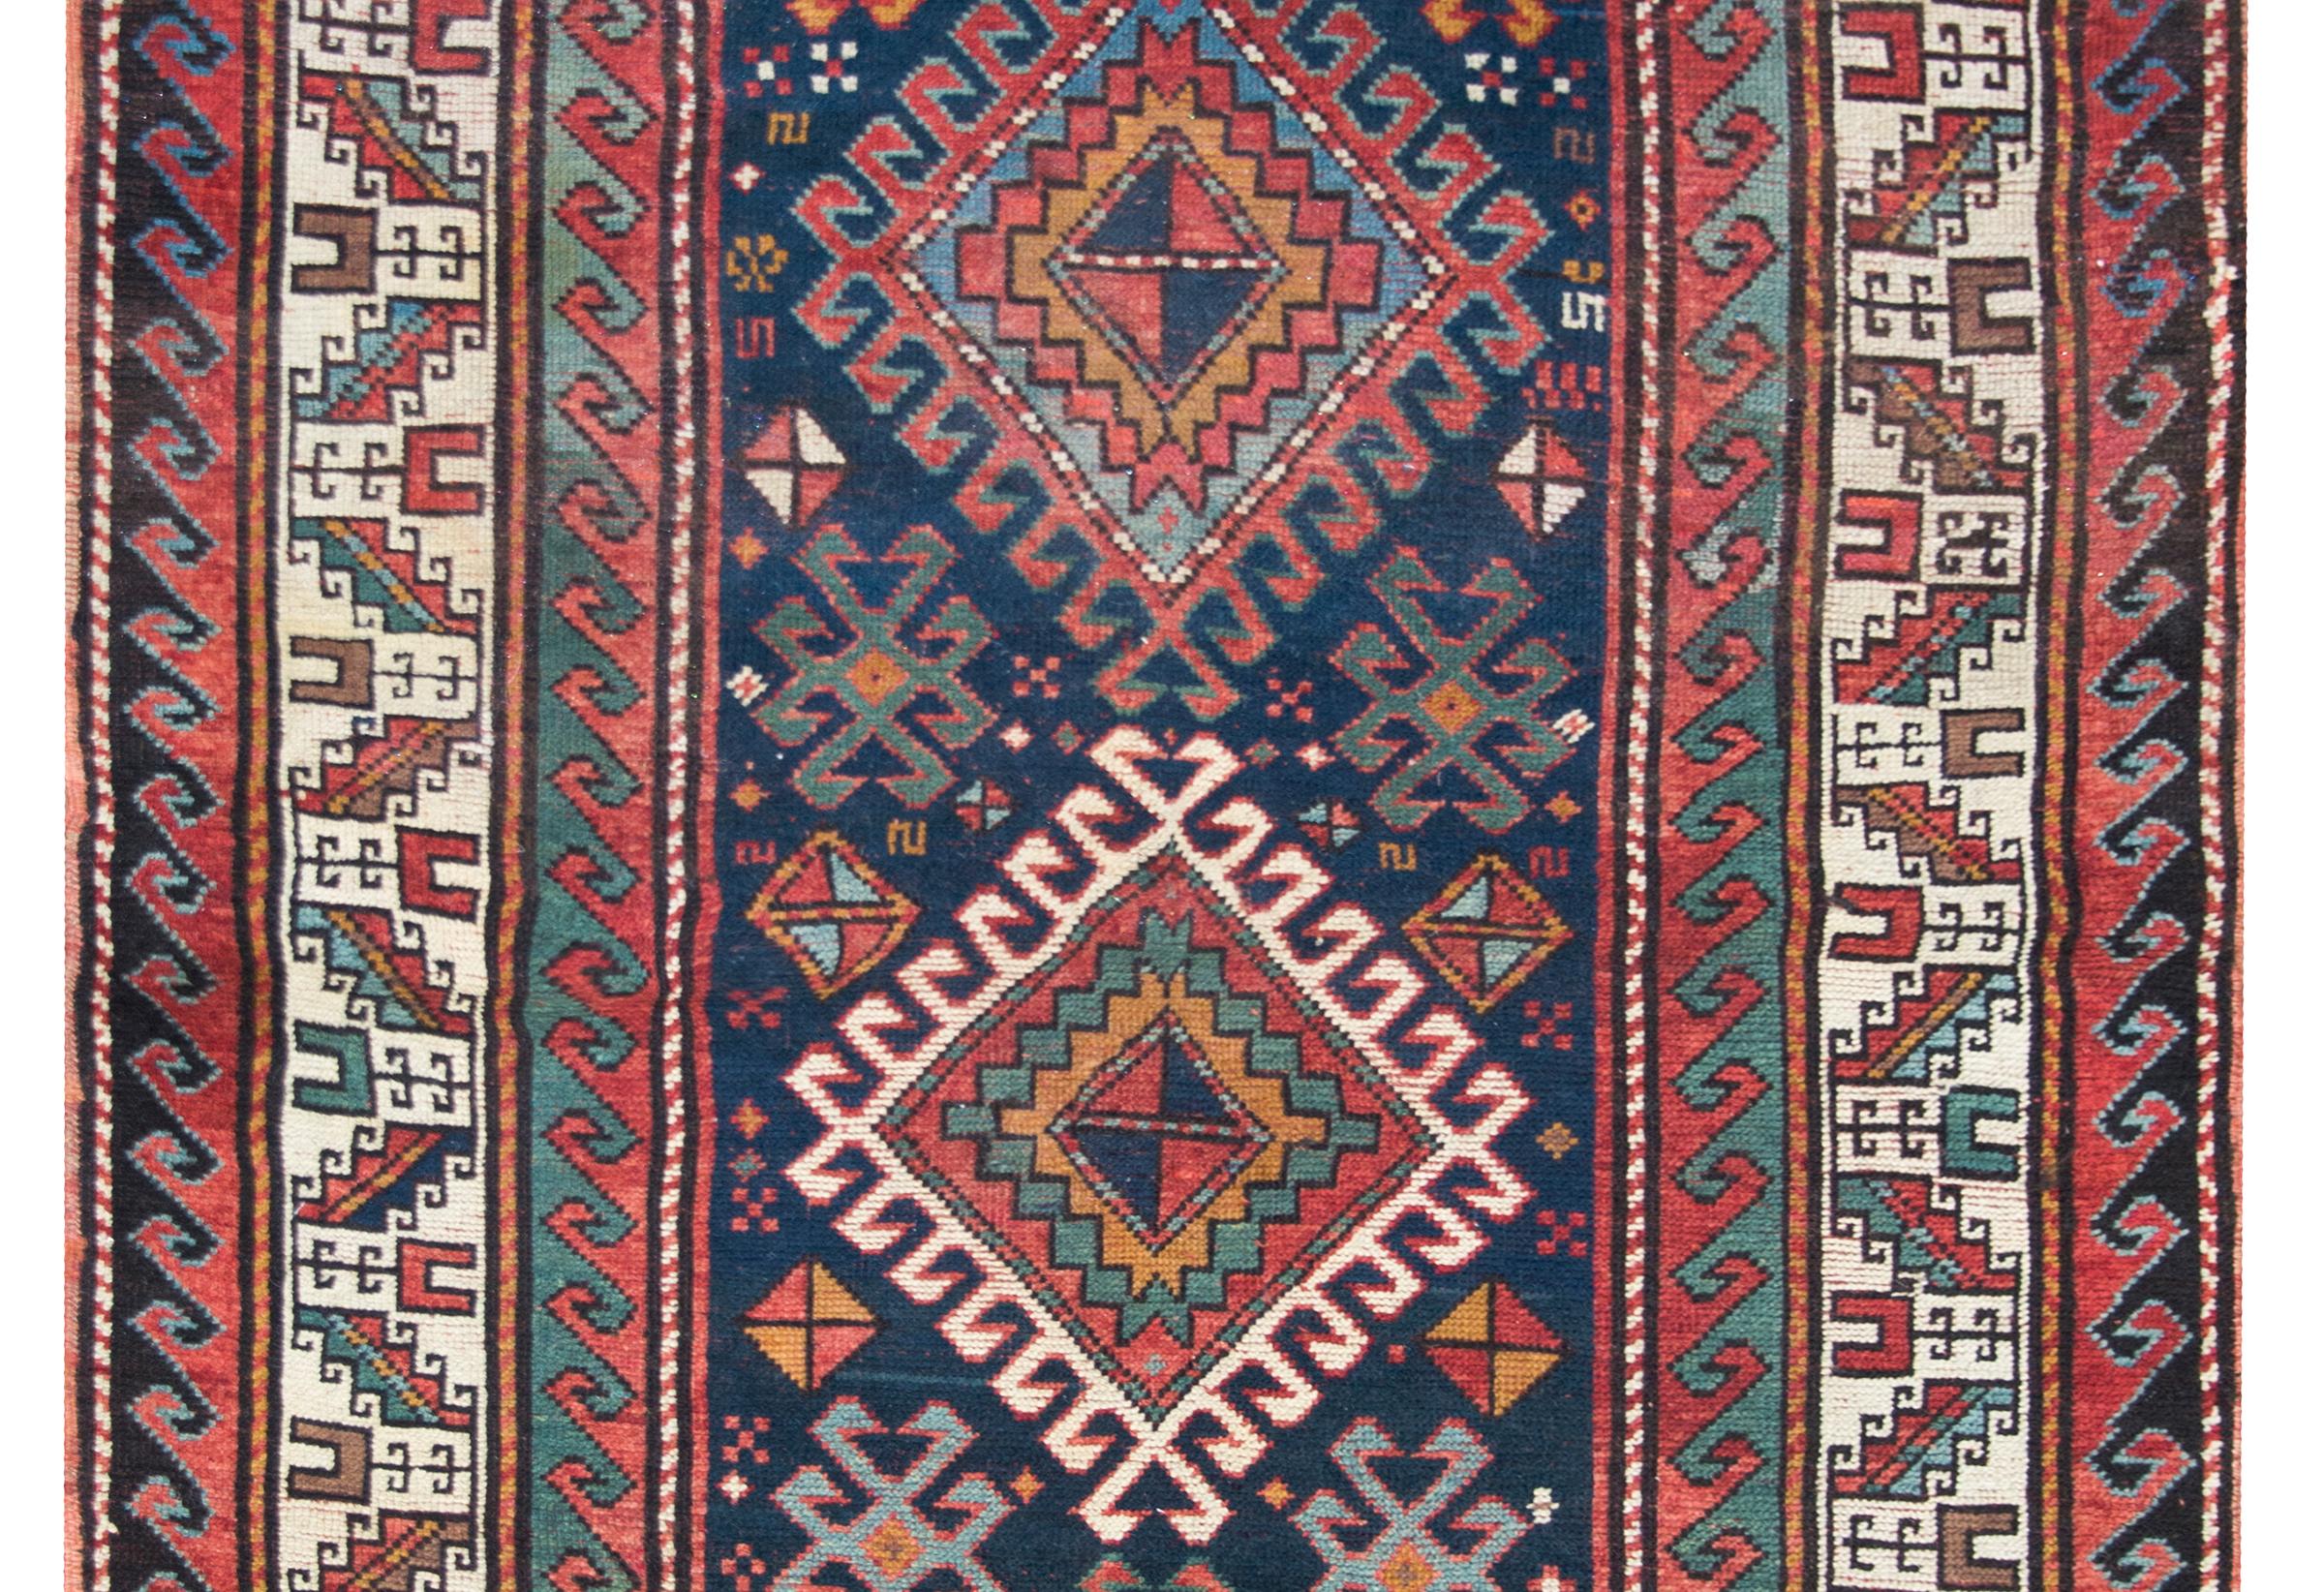 A stunning early 20th century Persian Shriven rug with three large stylized floral diamond medallions living amidst a field of more stylized flowers, and surrounded by an incredible border of even more stylized leaves and geometric patterns, and all